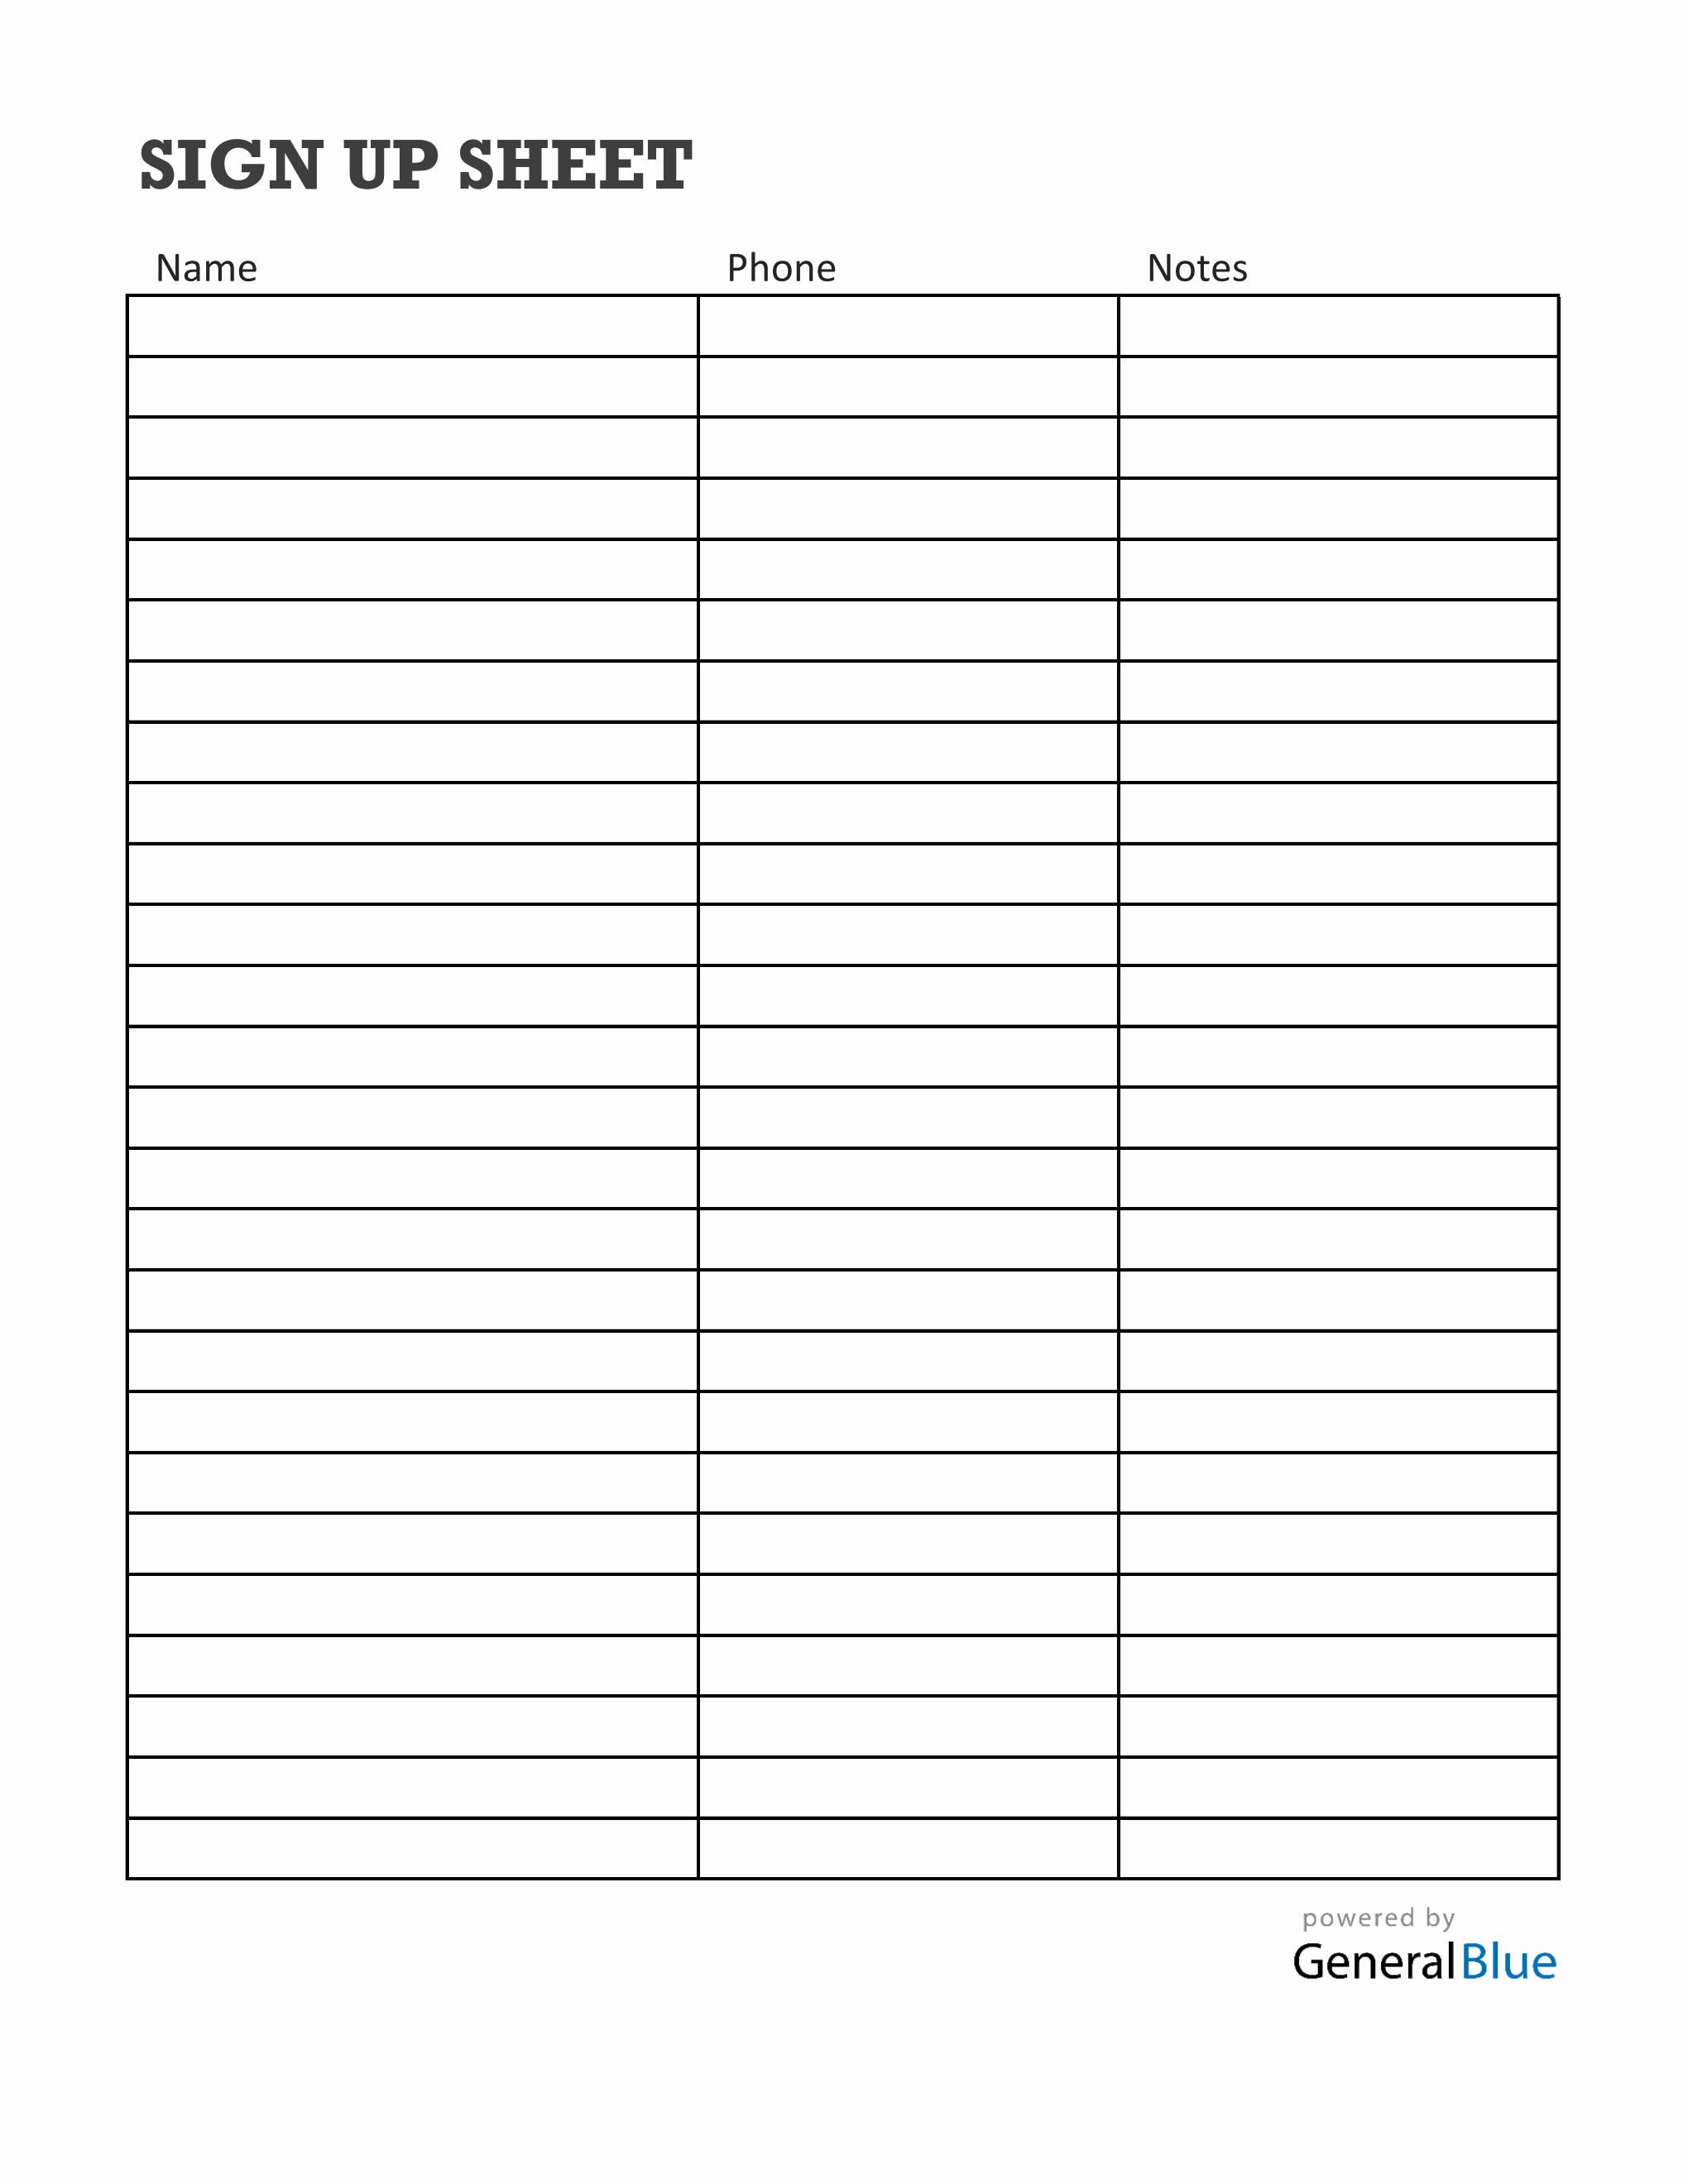 Blank SignUp Sheet in Excel